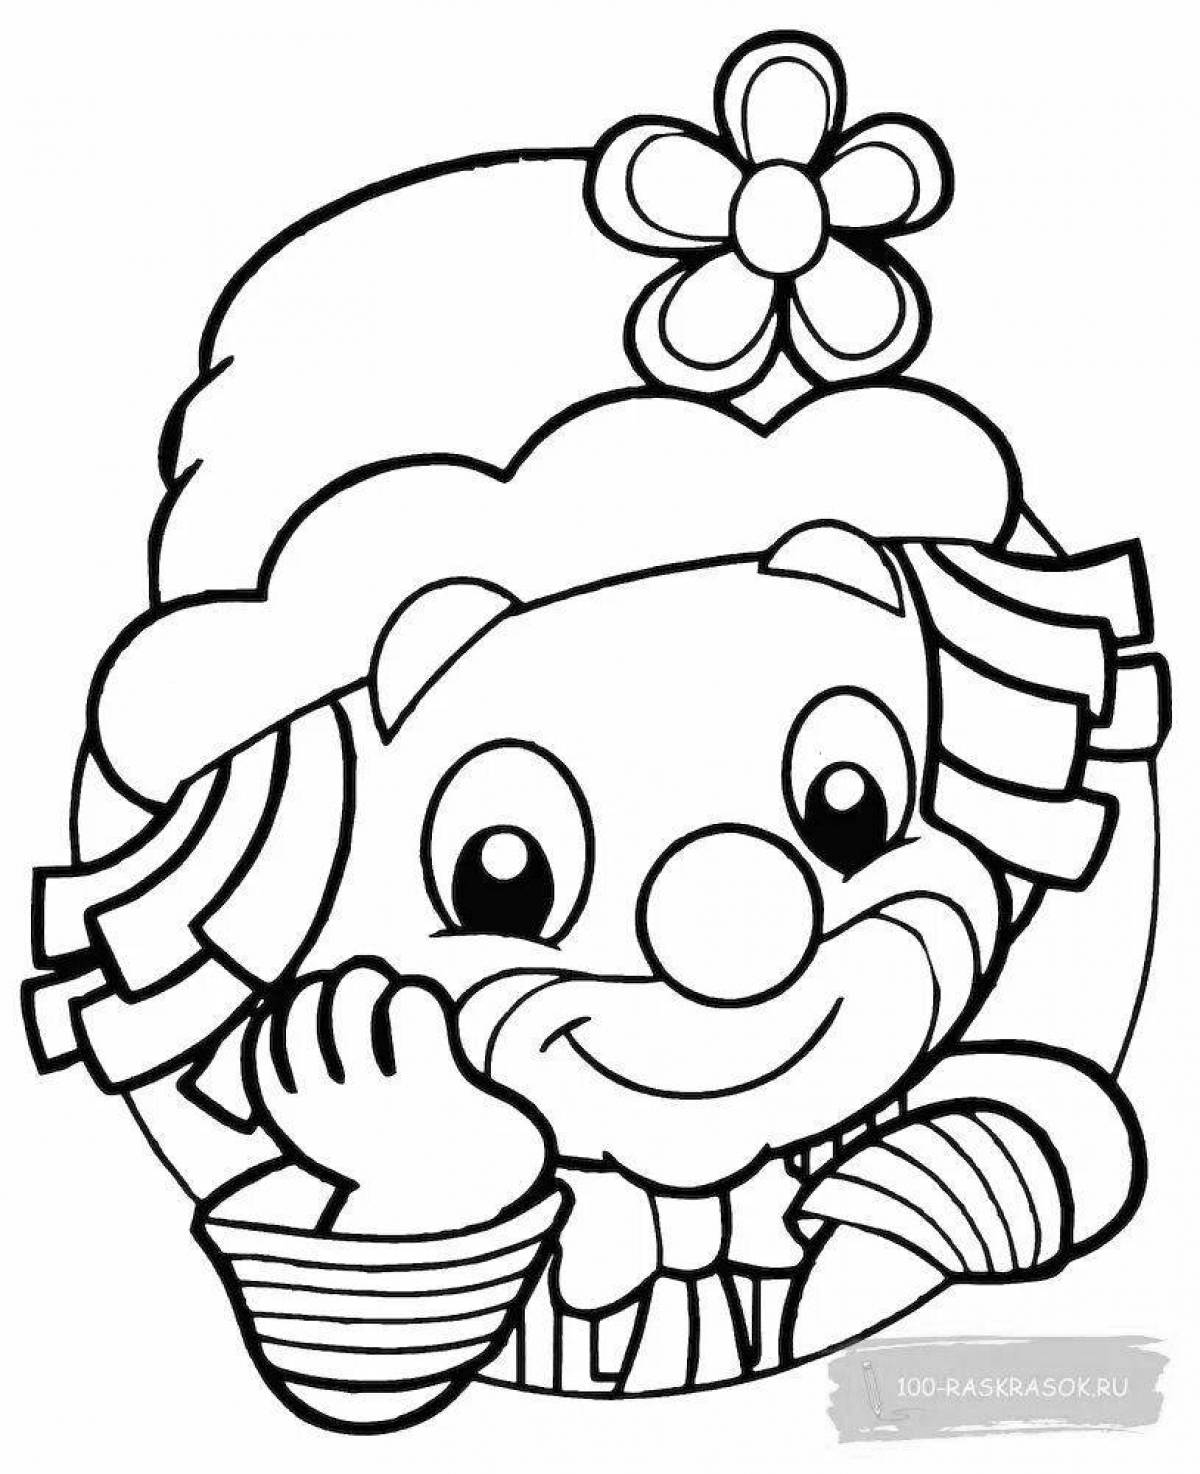 Funny clown coloring for kids